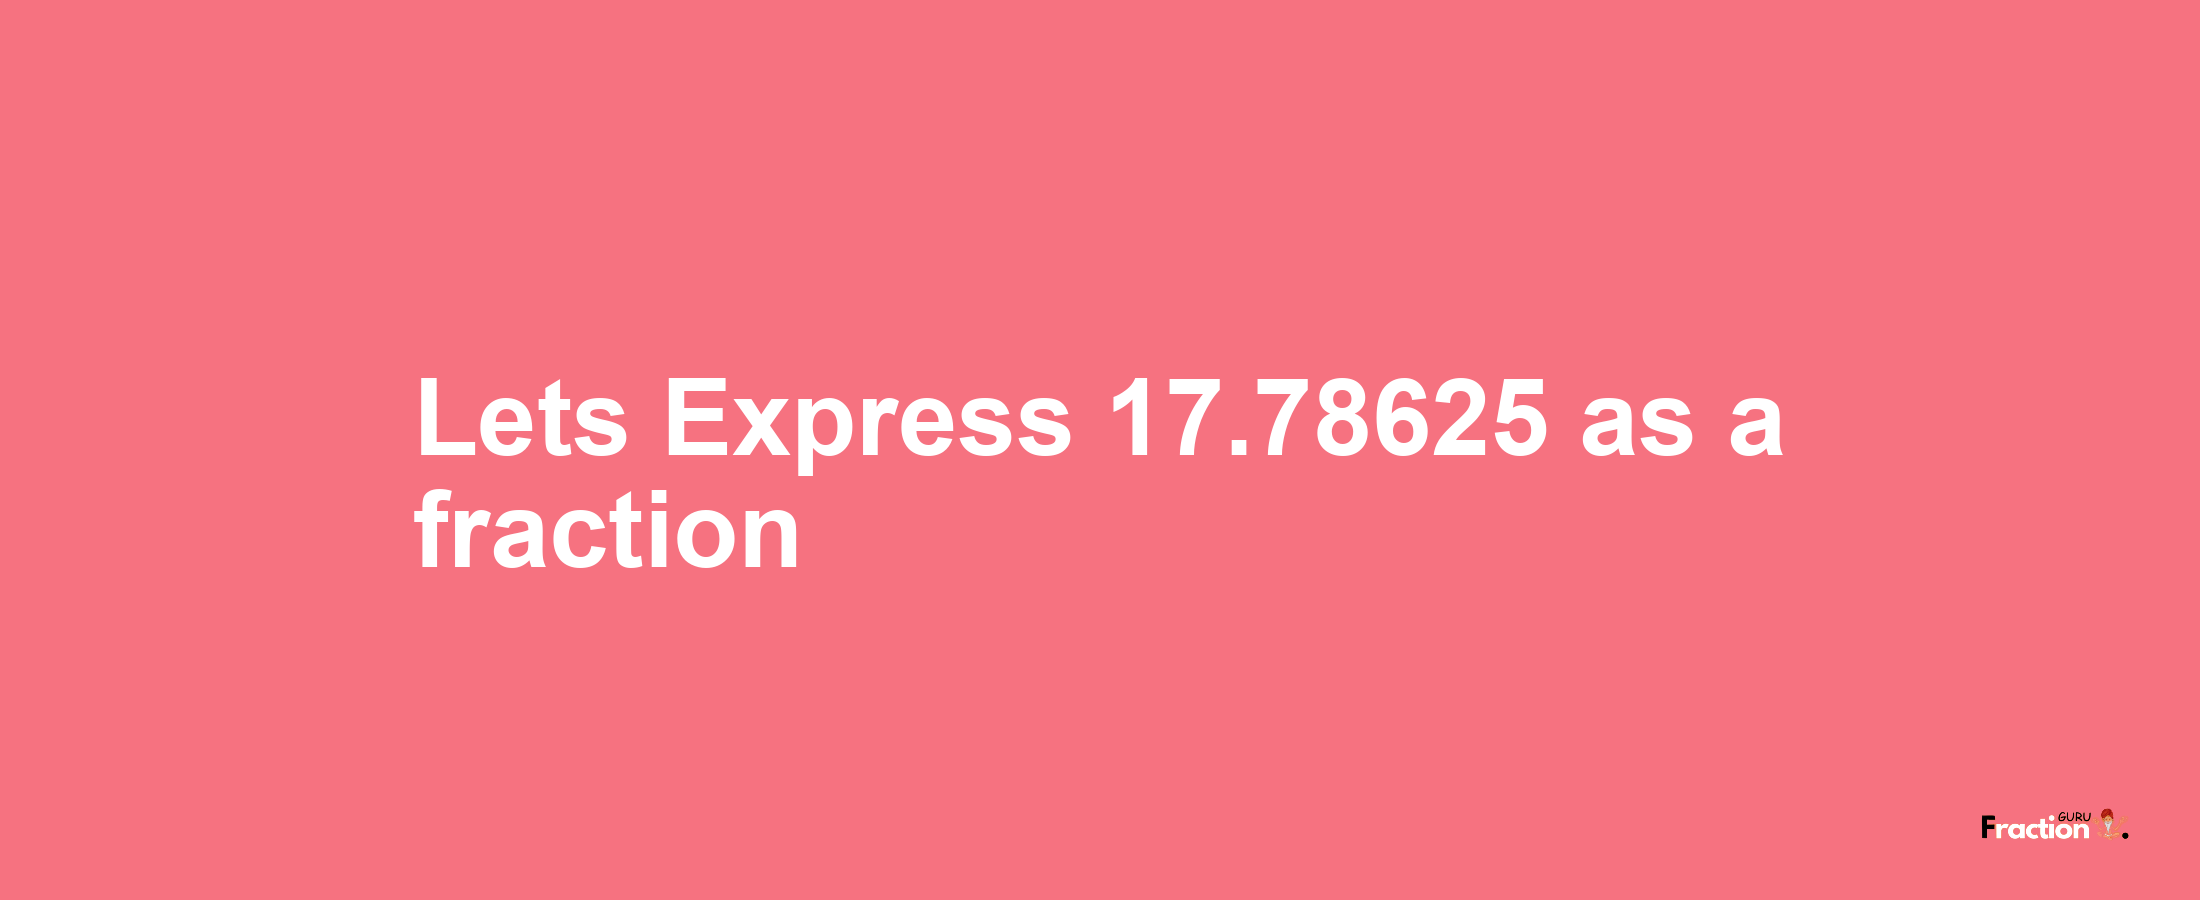 Lets Express 17.78625 as afraction